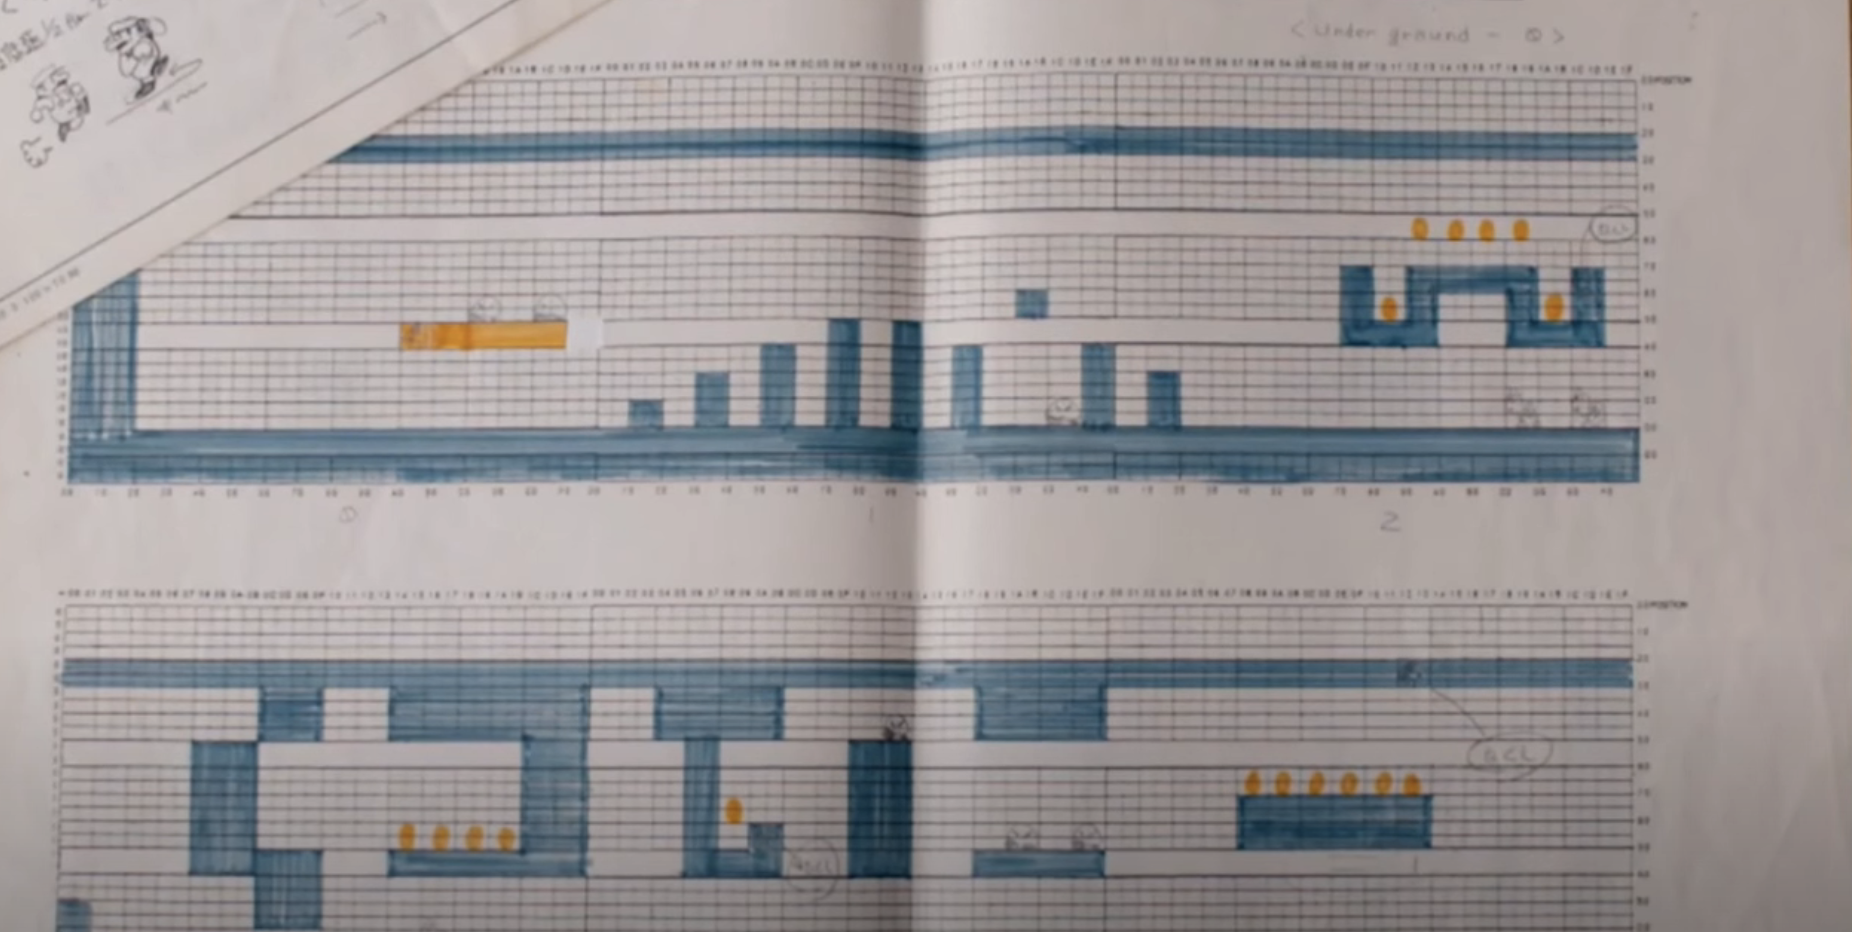 Graphical music score with unique notation, including blue horizontal bars and small yellow symbols, spread across an open book